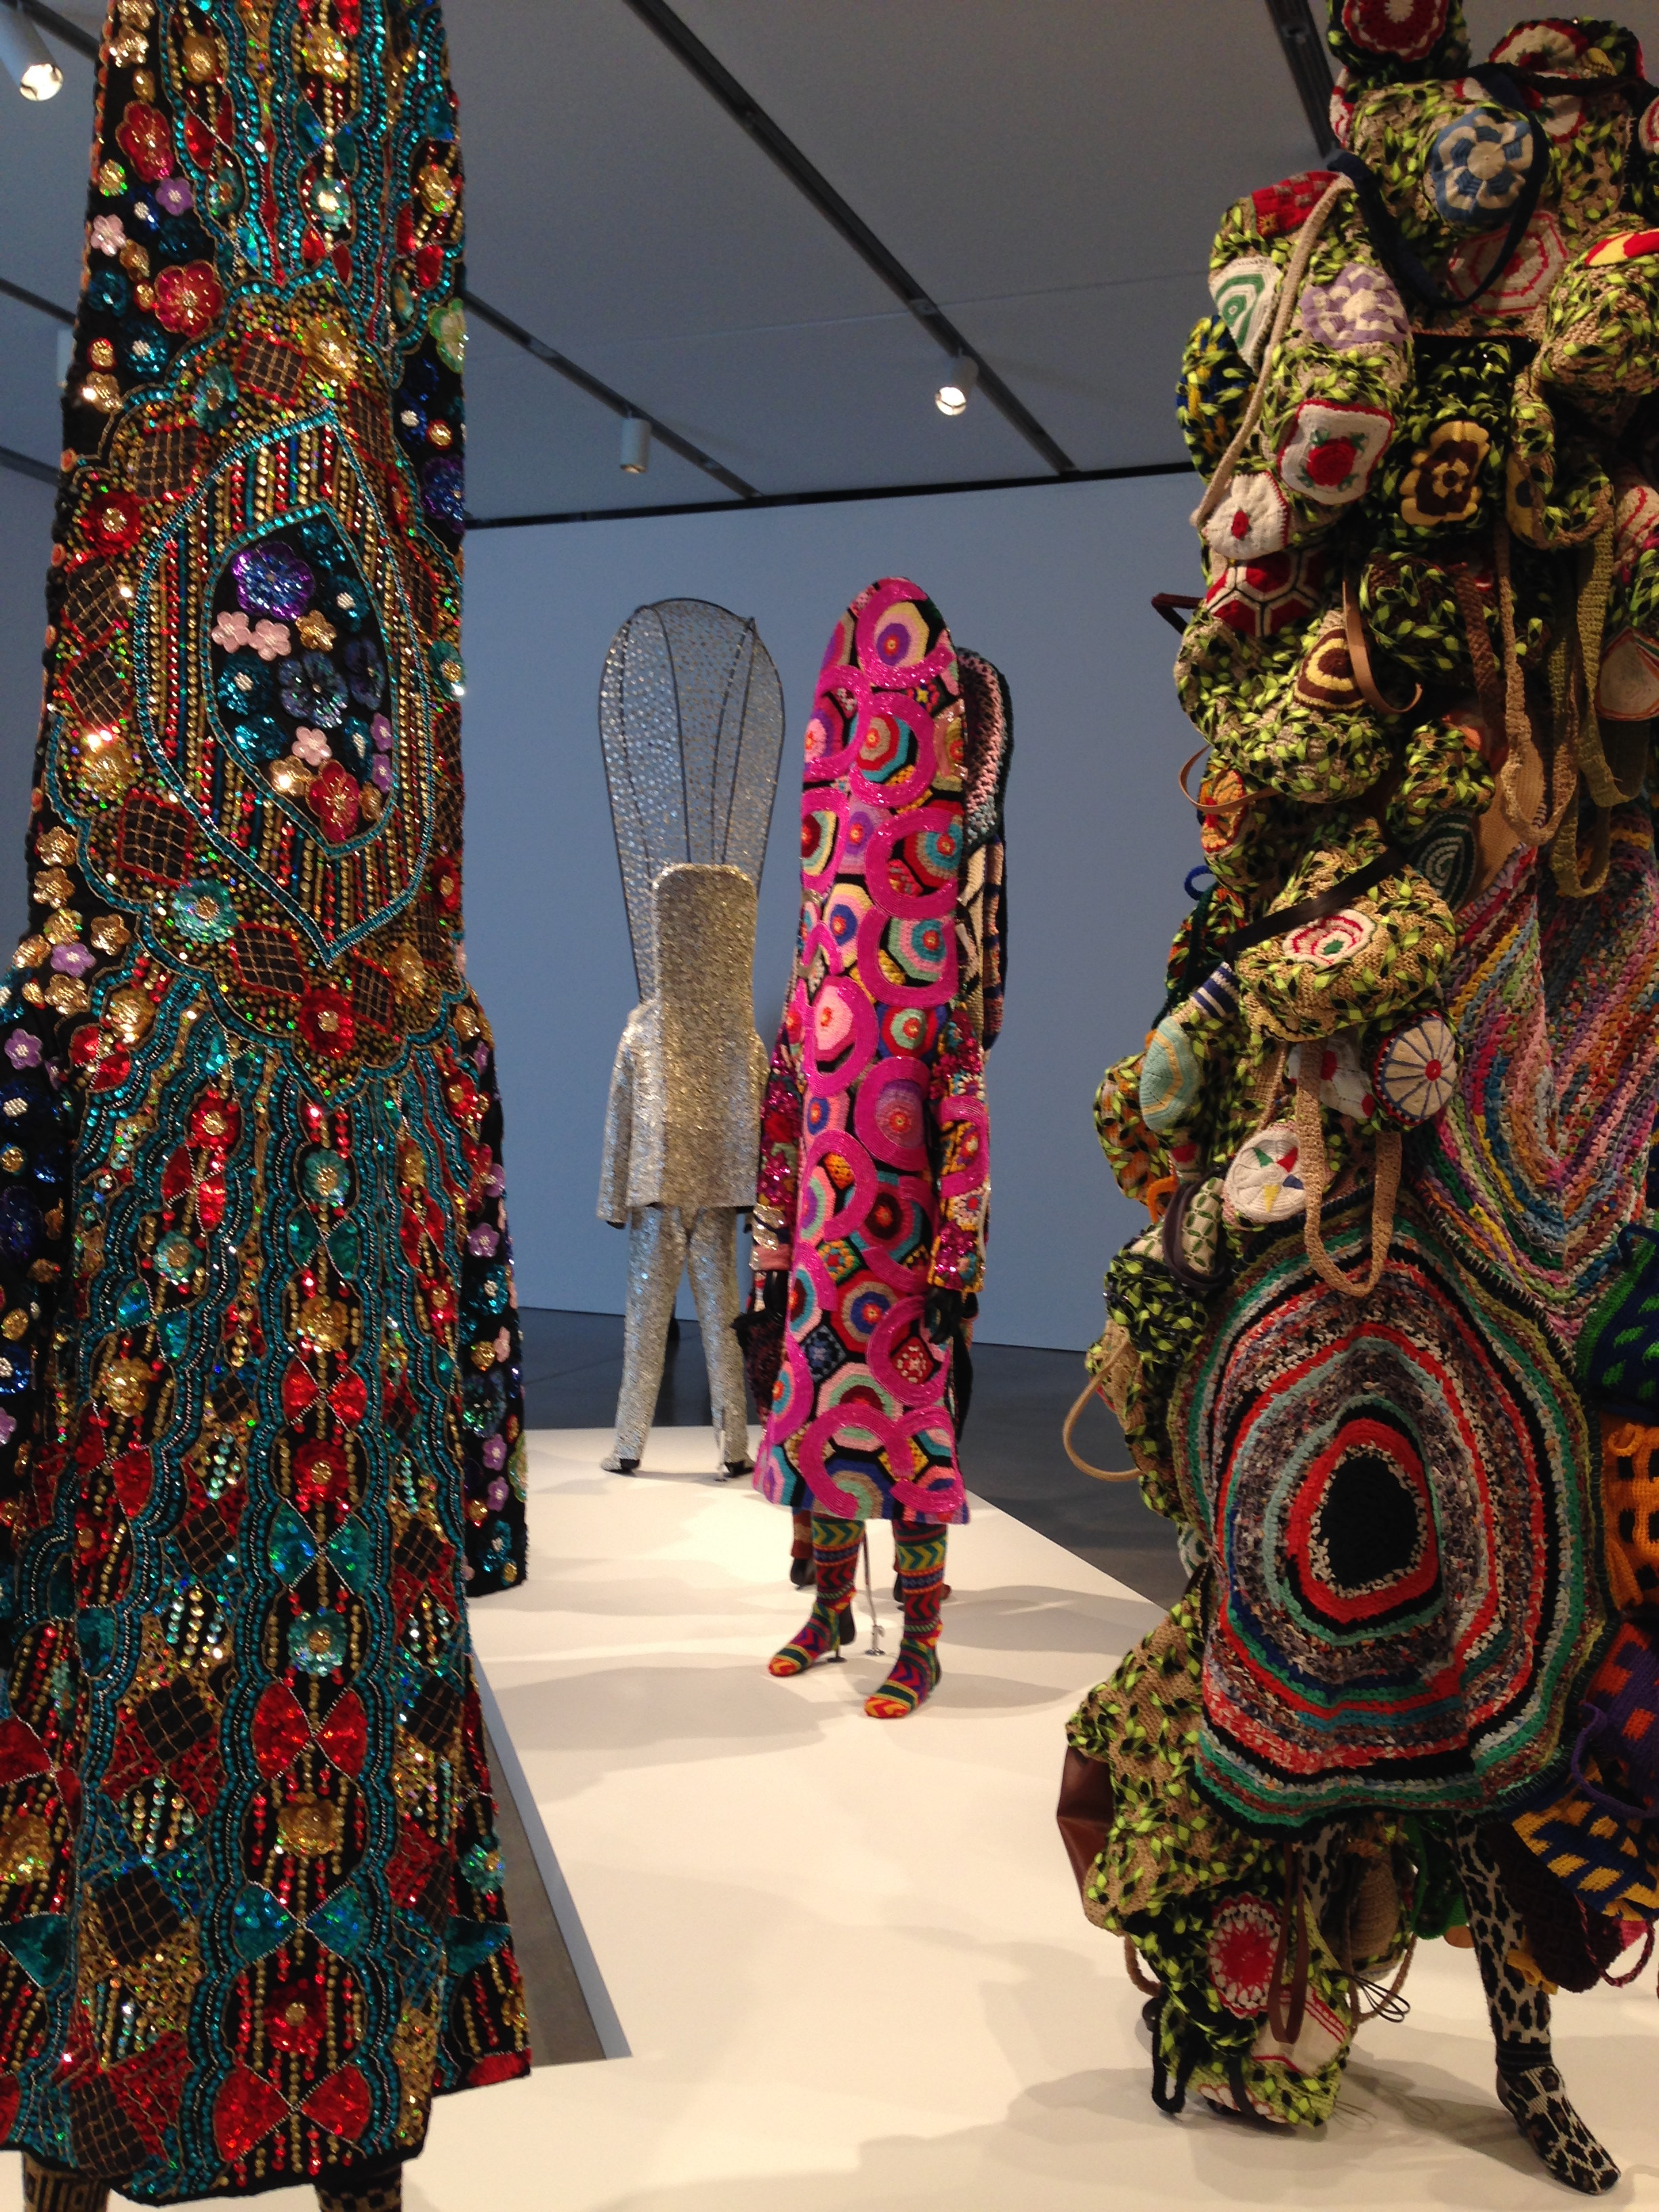 Definitely art: soundsuits by Nick Cave, photographed by Alicia Aho.